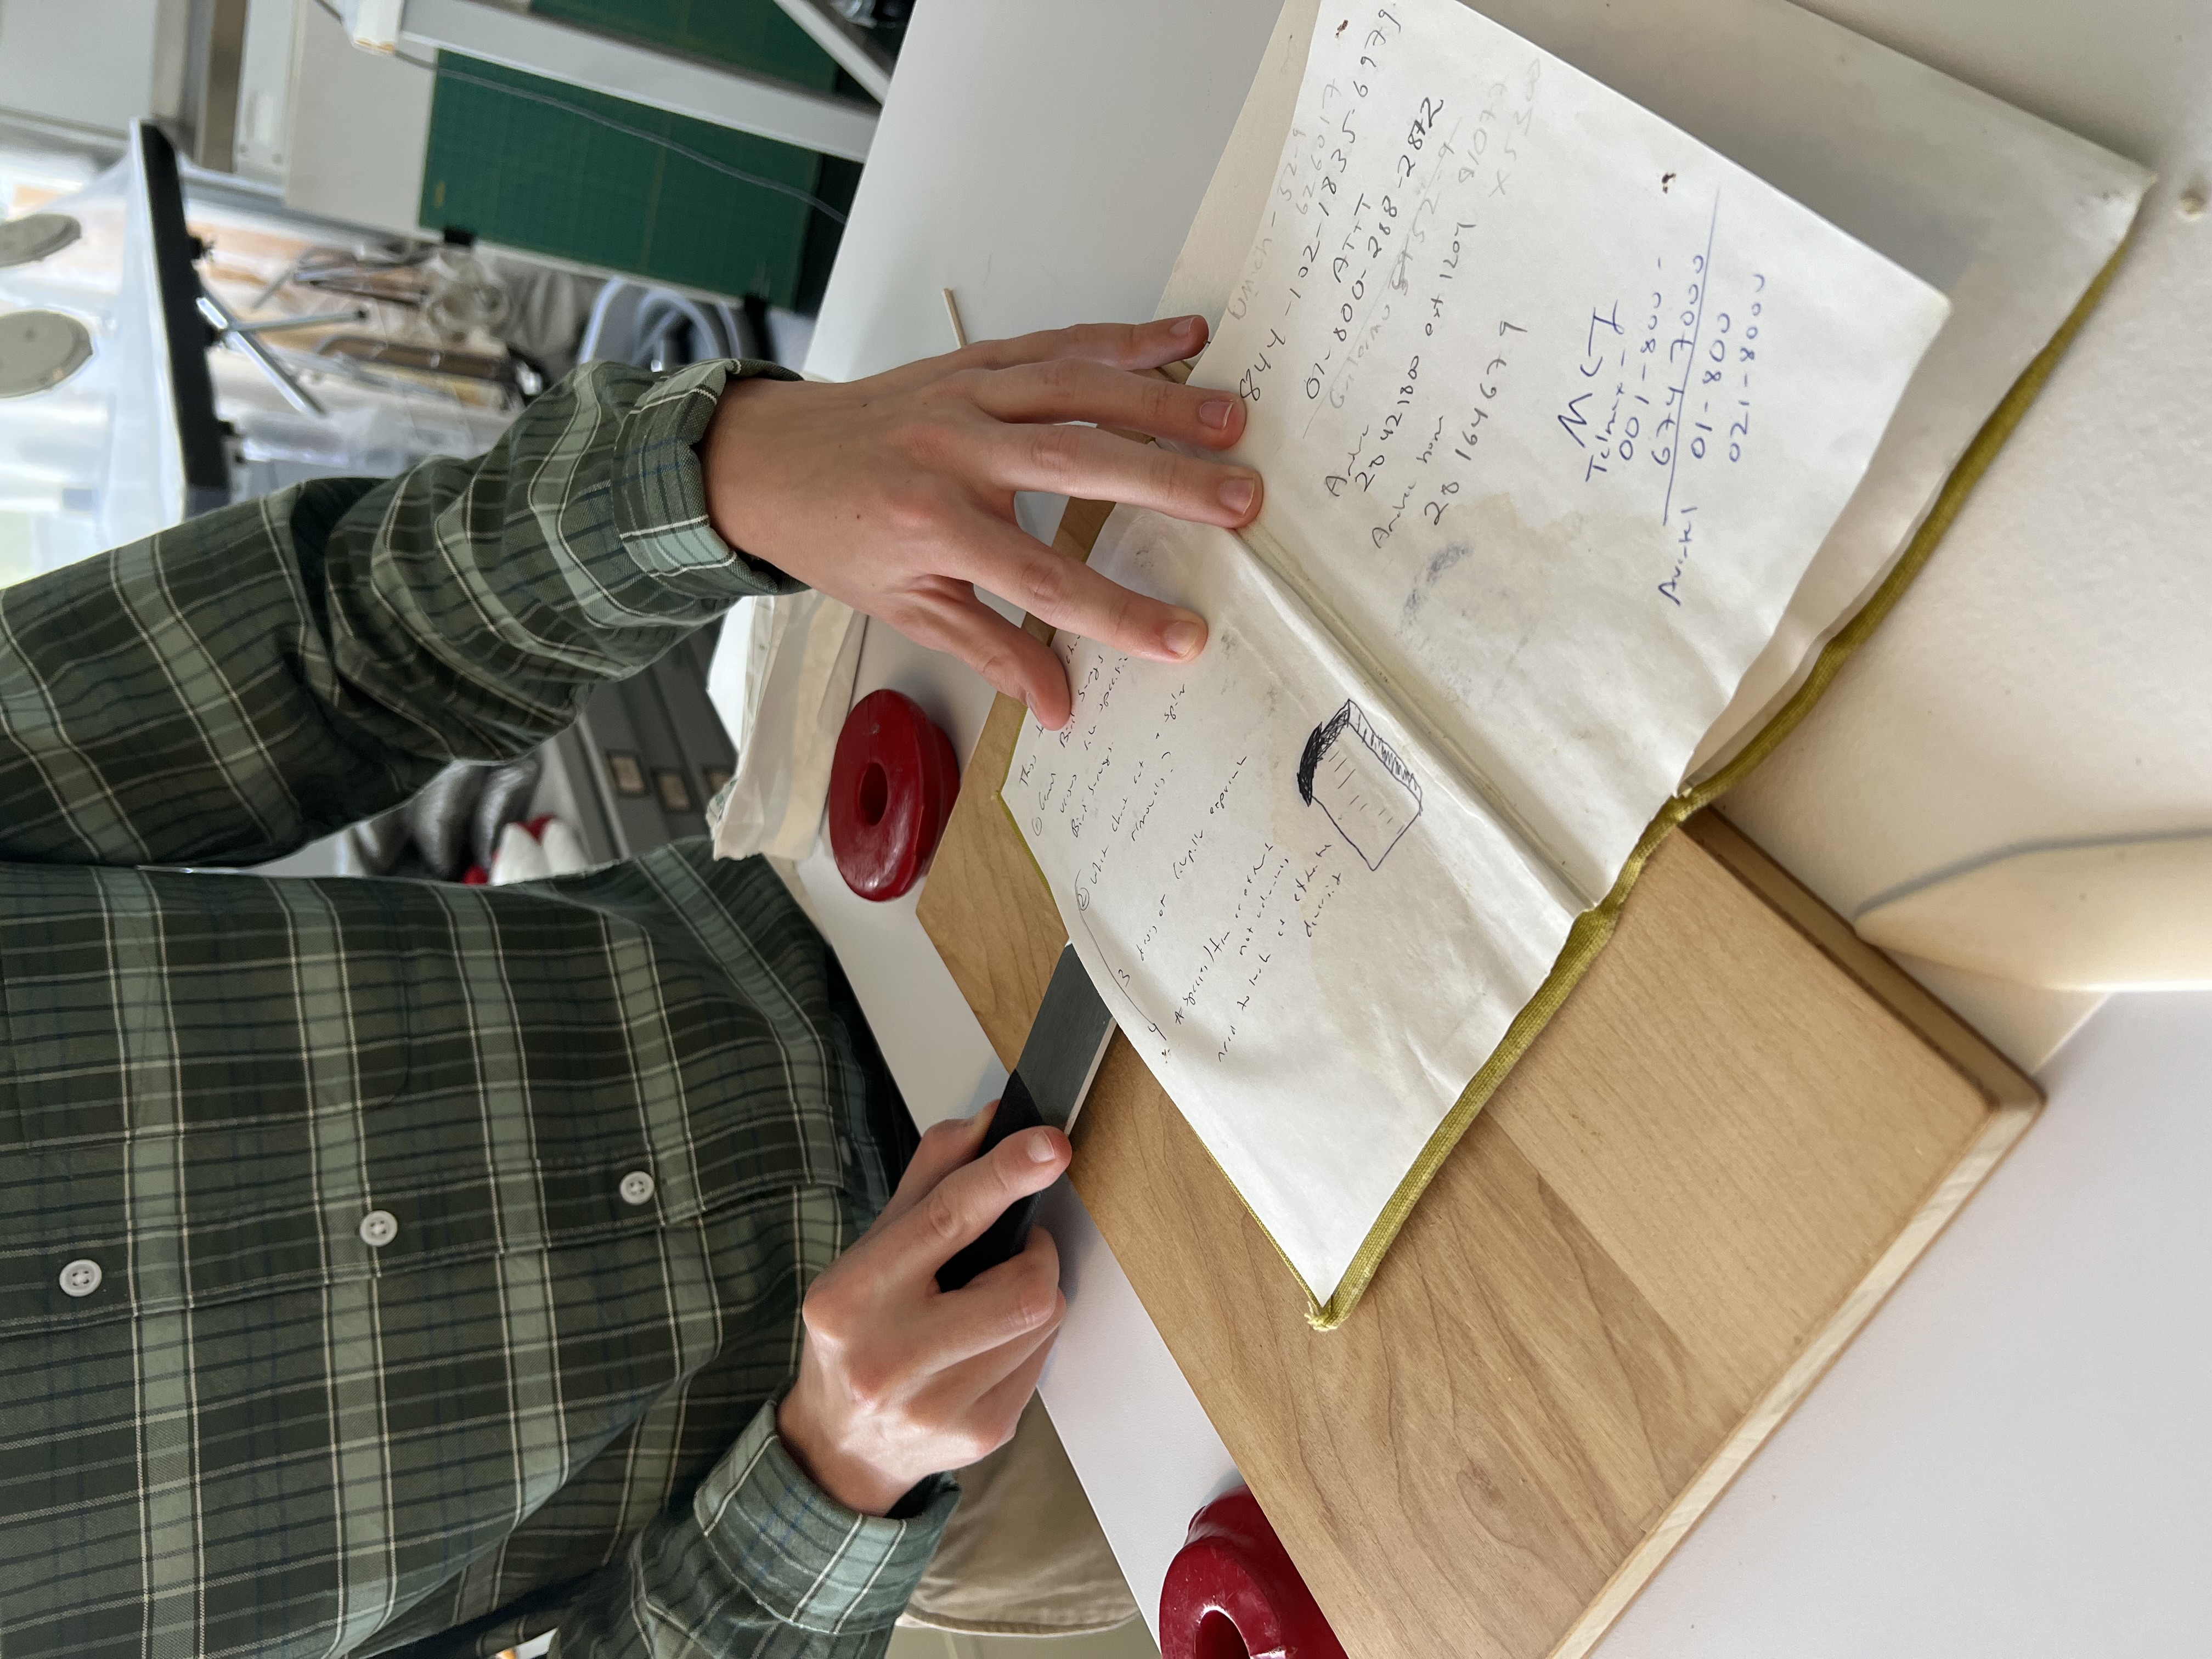 Ben Conklin uses a lifting knife to split the book board and lift the endpaper pastedown from a wate